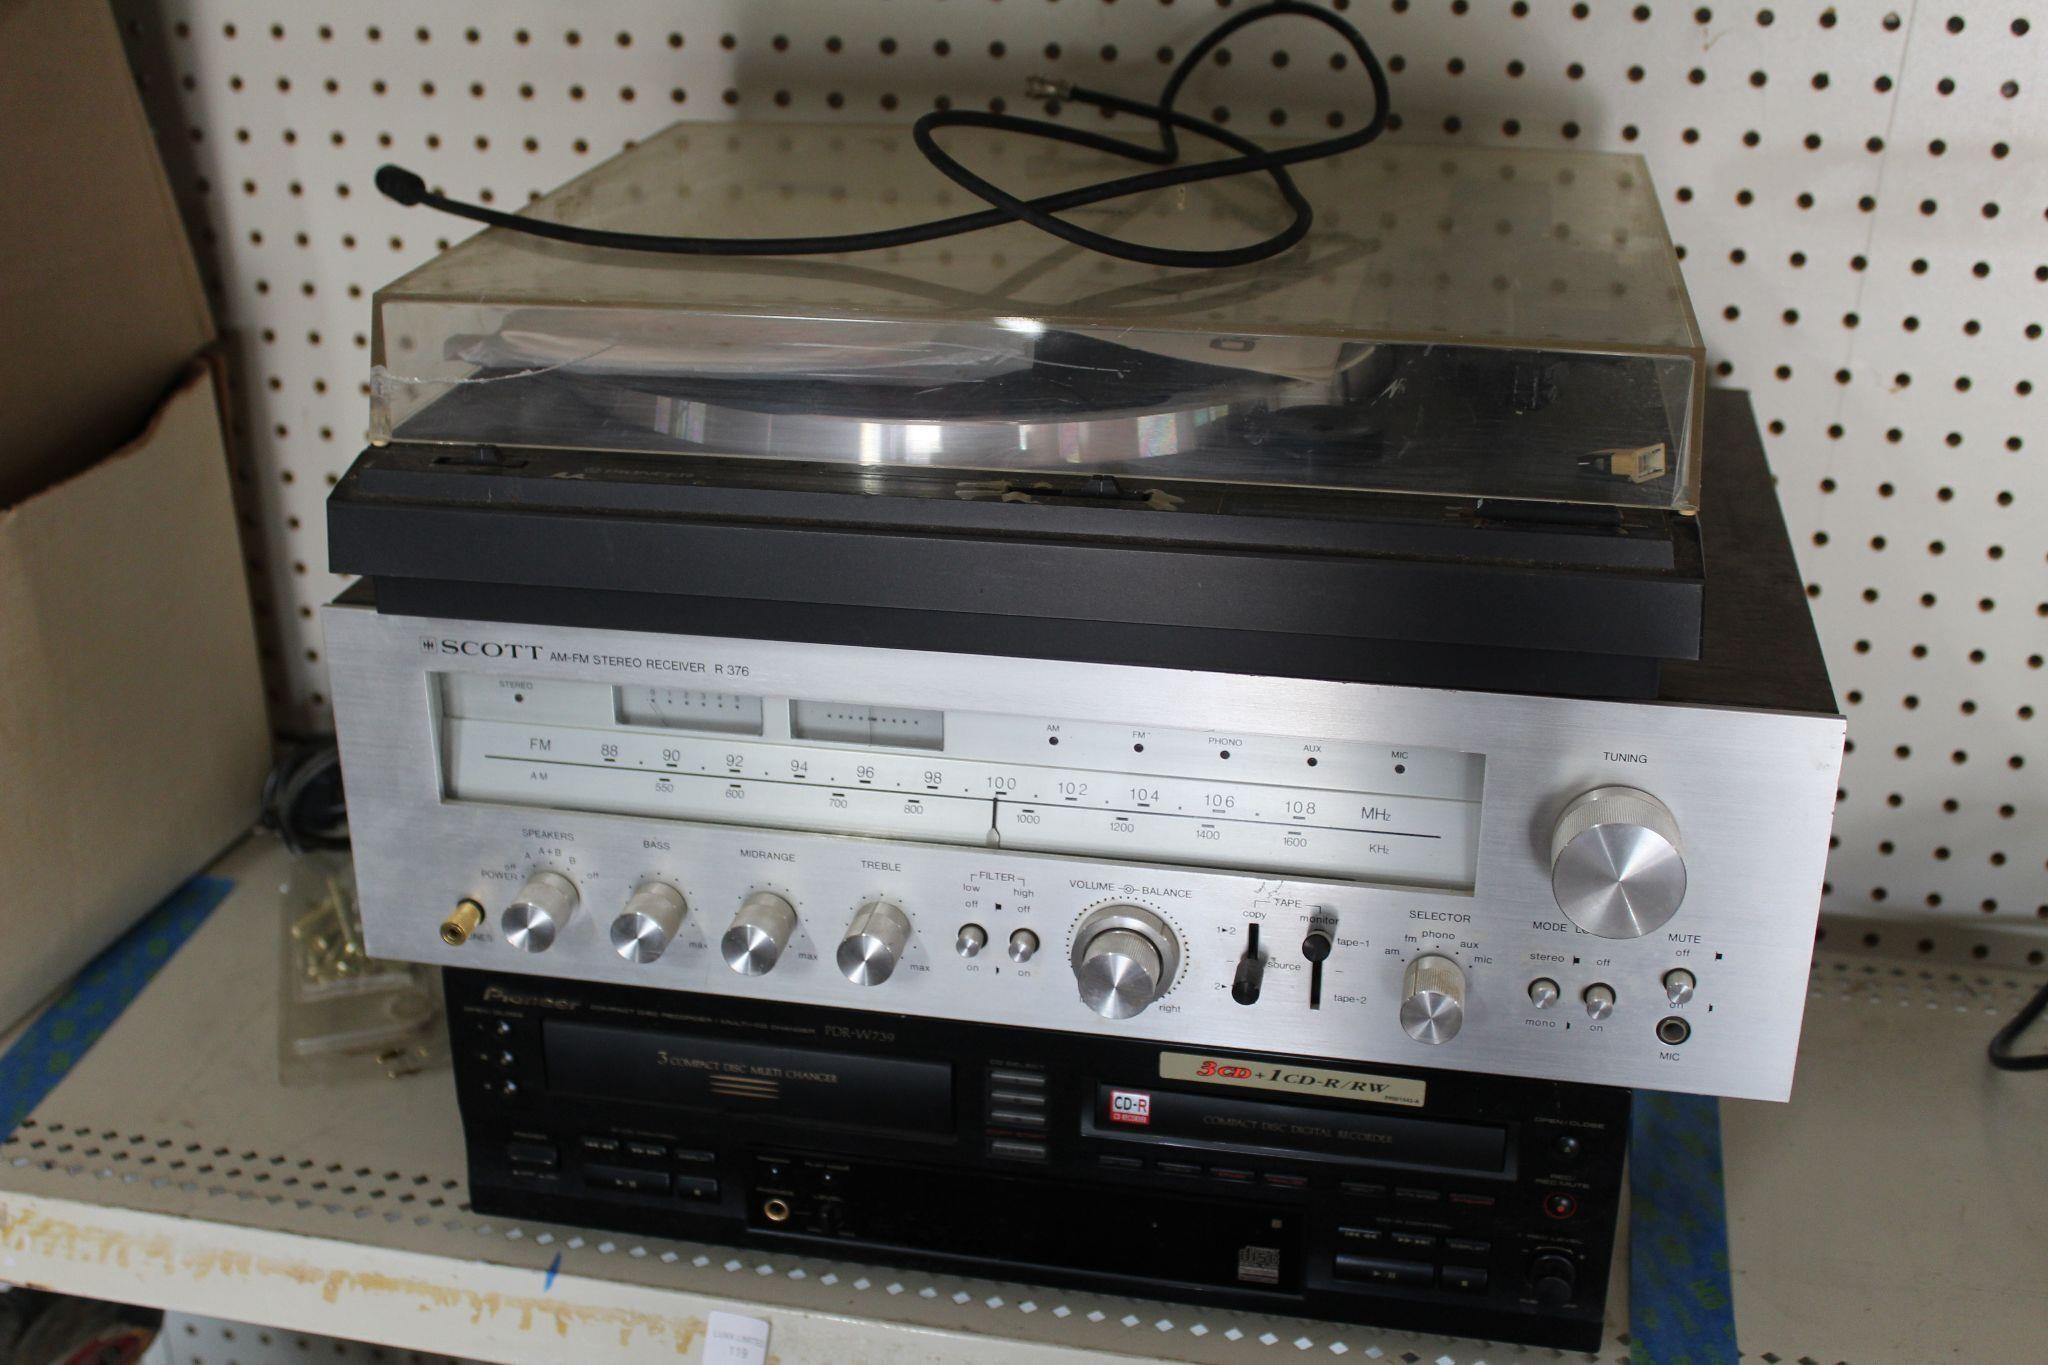 SCOTT Record Player and Pioneer Stereo Set